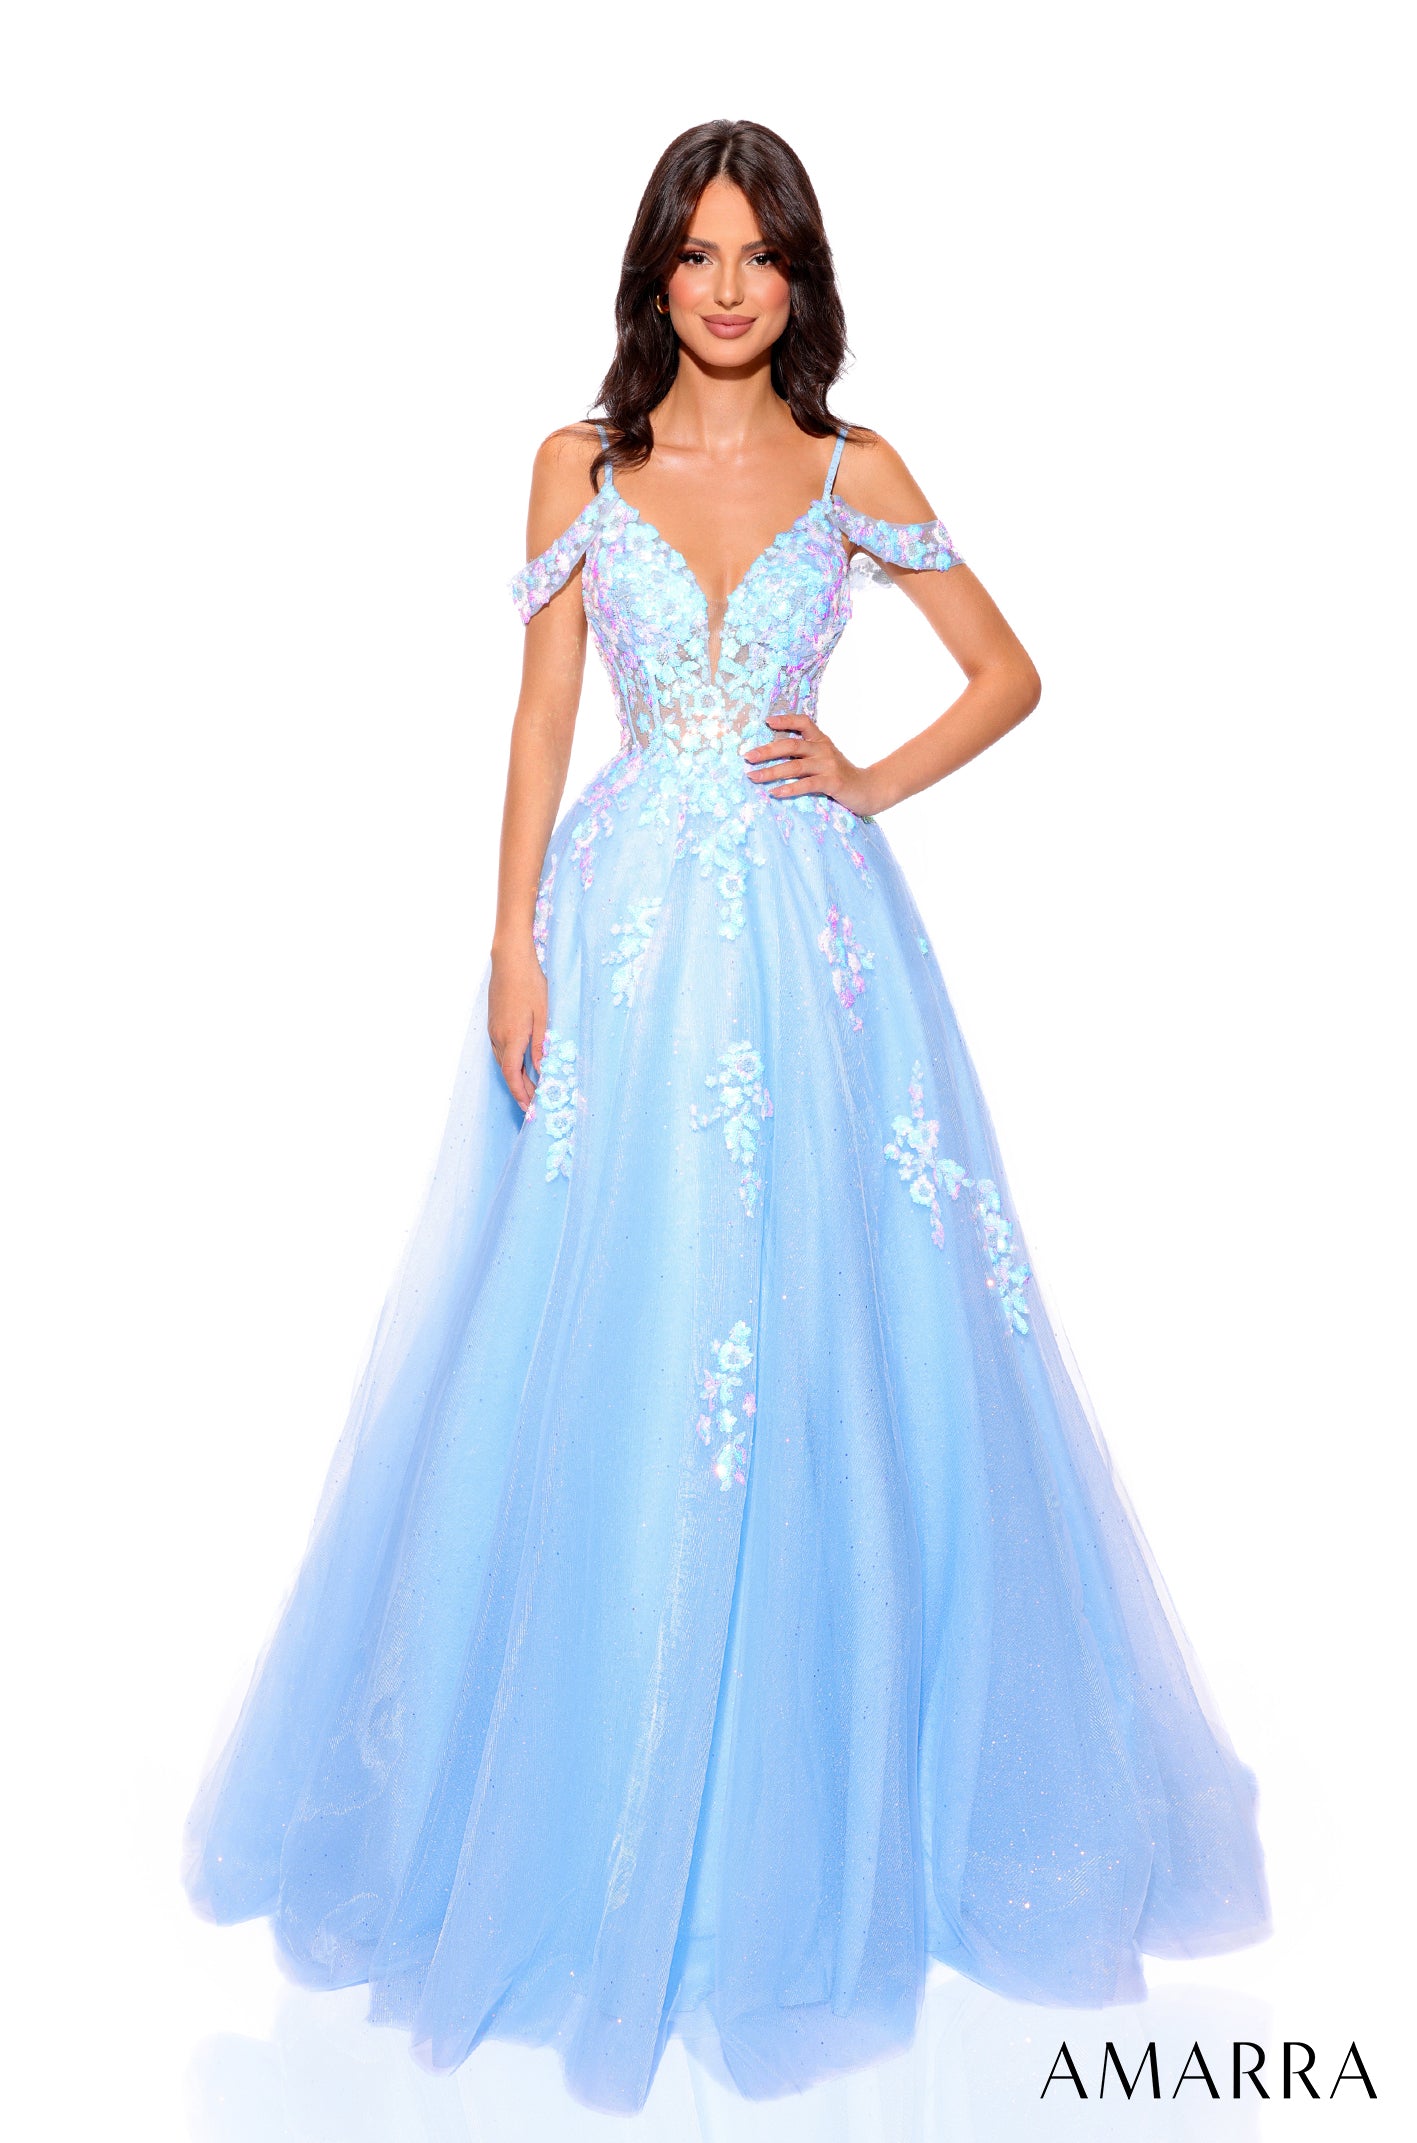 Be the center of attention in this stunning Amarra 88875 Long Shimmer Sequin Ballgown. The off the shoulder design and sheer corset add a touch of elegance, while the shimmering sequins will make you shine all night long. Perfect for prom or any special occasion. Be ready to be the talk of the town for months with this breathtaking gown.